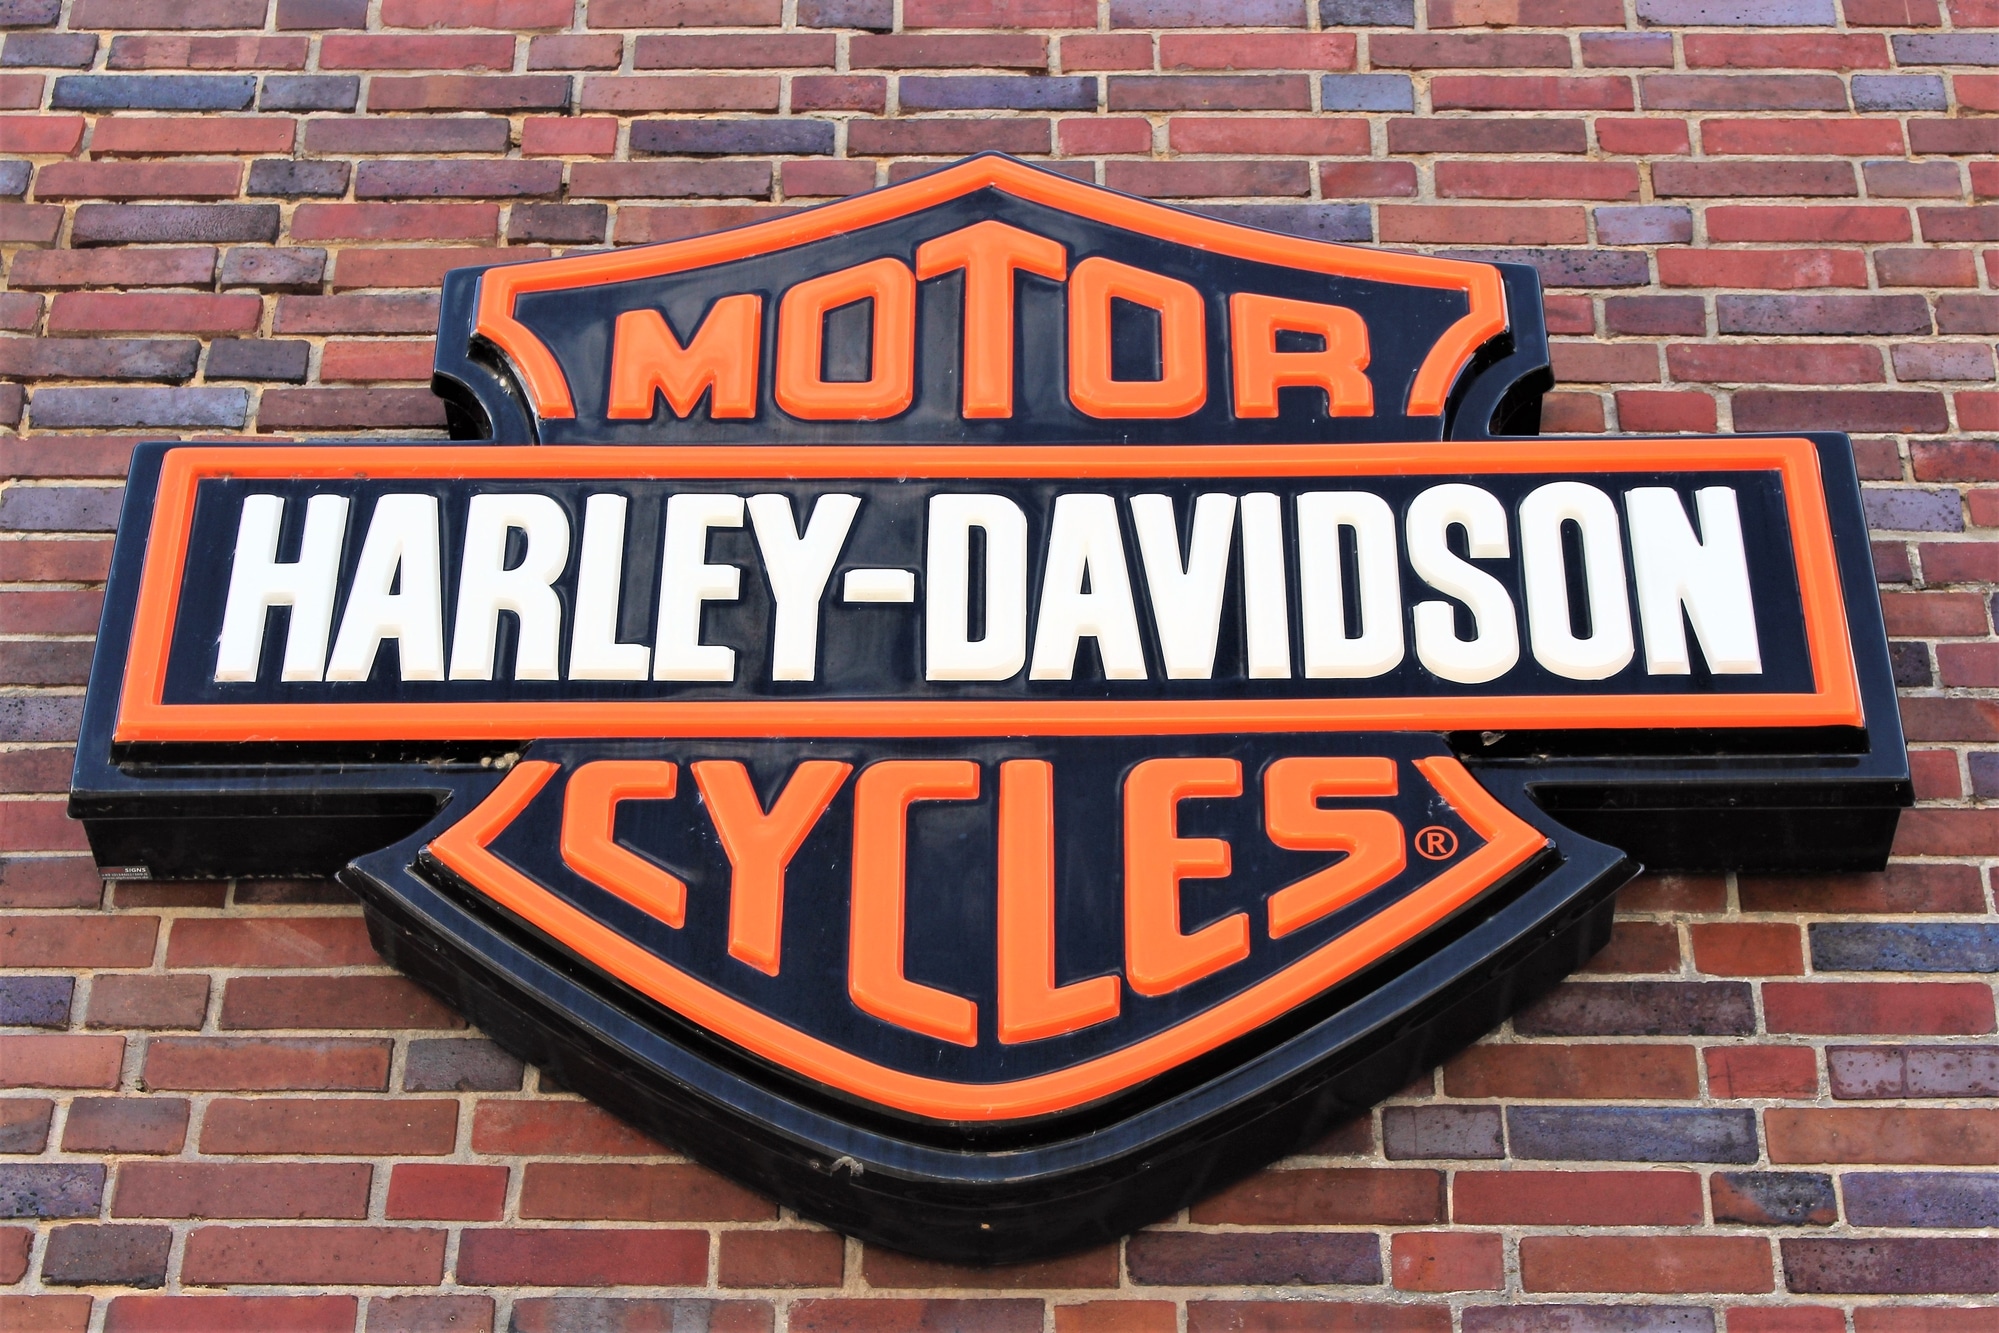 Harley Davidson Swot Analysis 4 Opportunities And Threats For The Motorcycle Giant